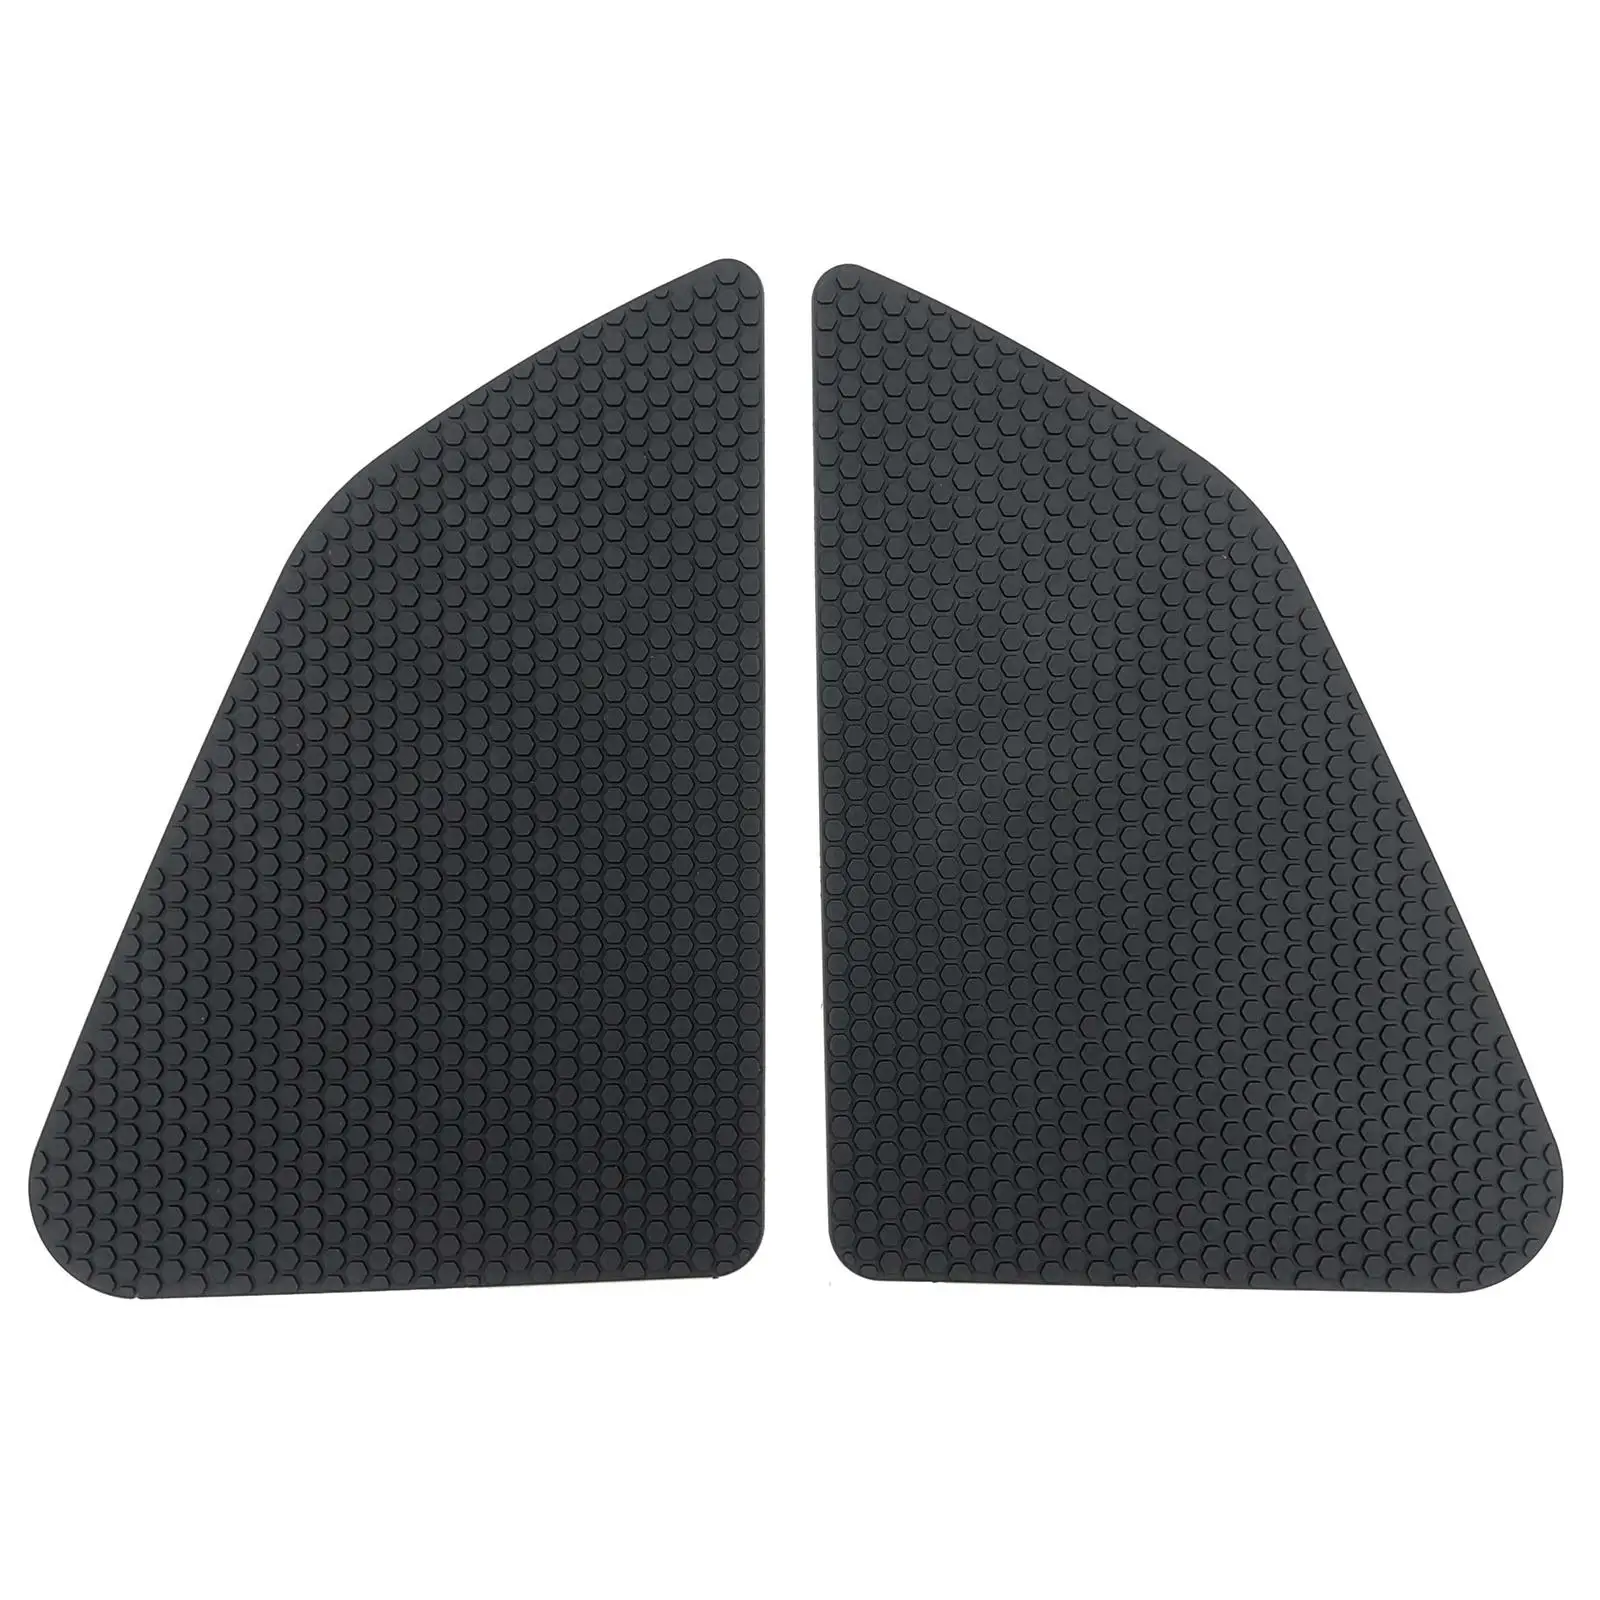 2Pcs Gas Tank Traction Side Pad Protector Stickers for Ducati Desert x